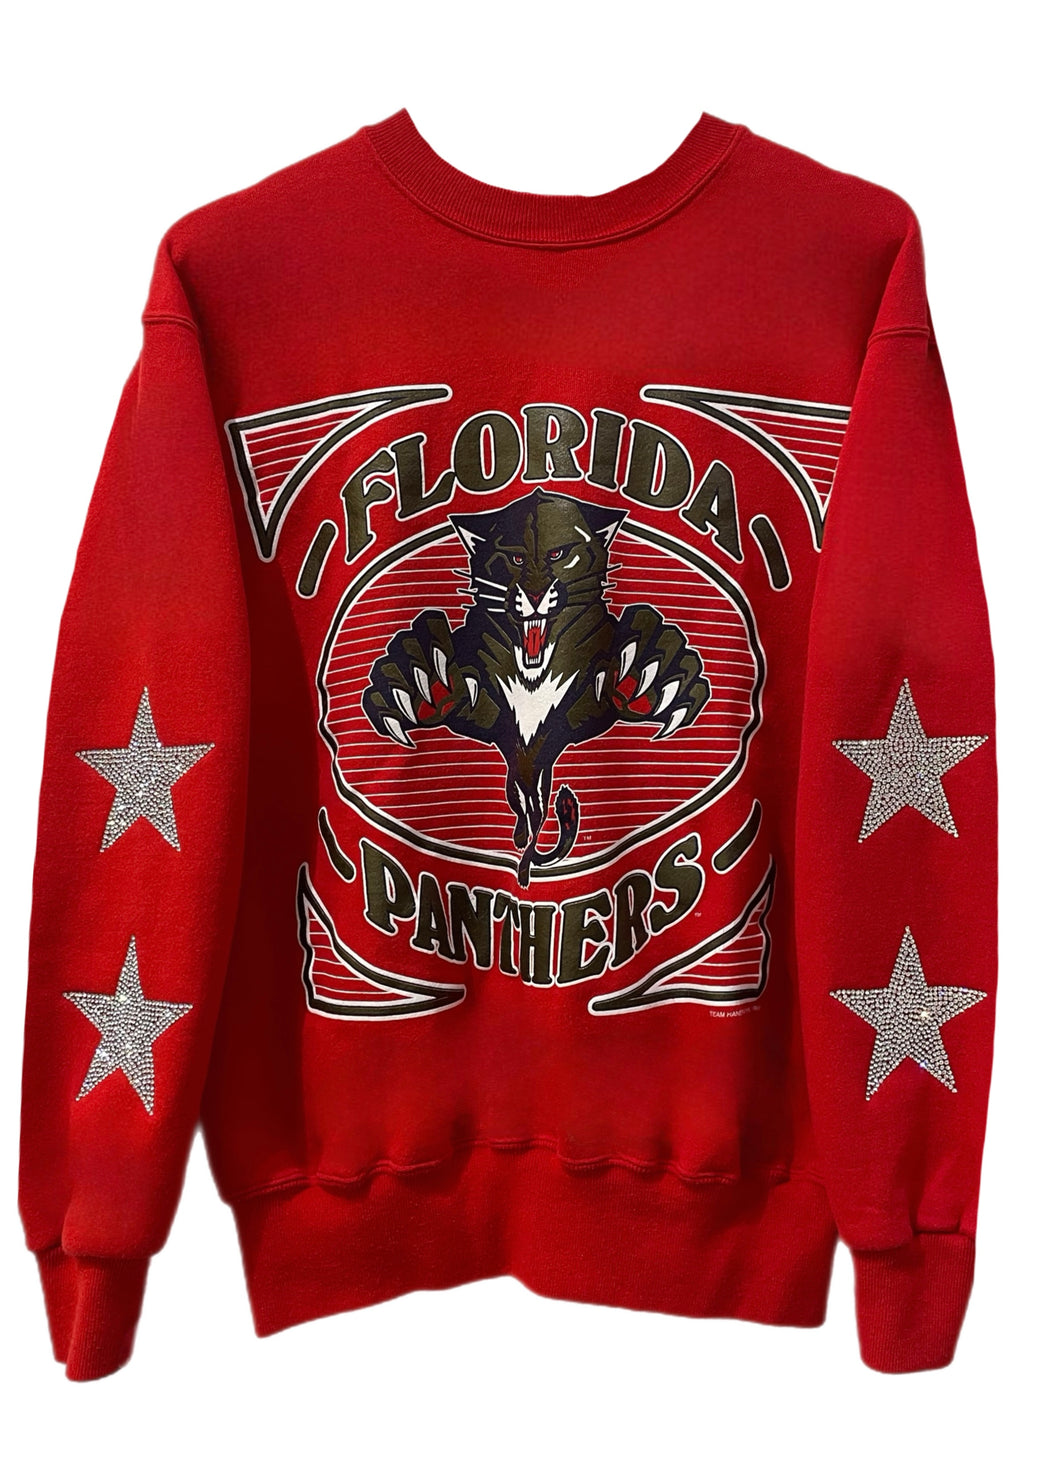 Florida Panthers, NHL One of a KIND Vintage 1993 Sweatshirt with Crystal Star Design